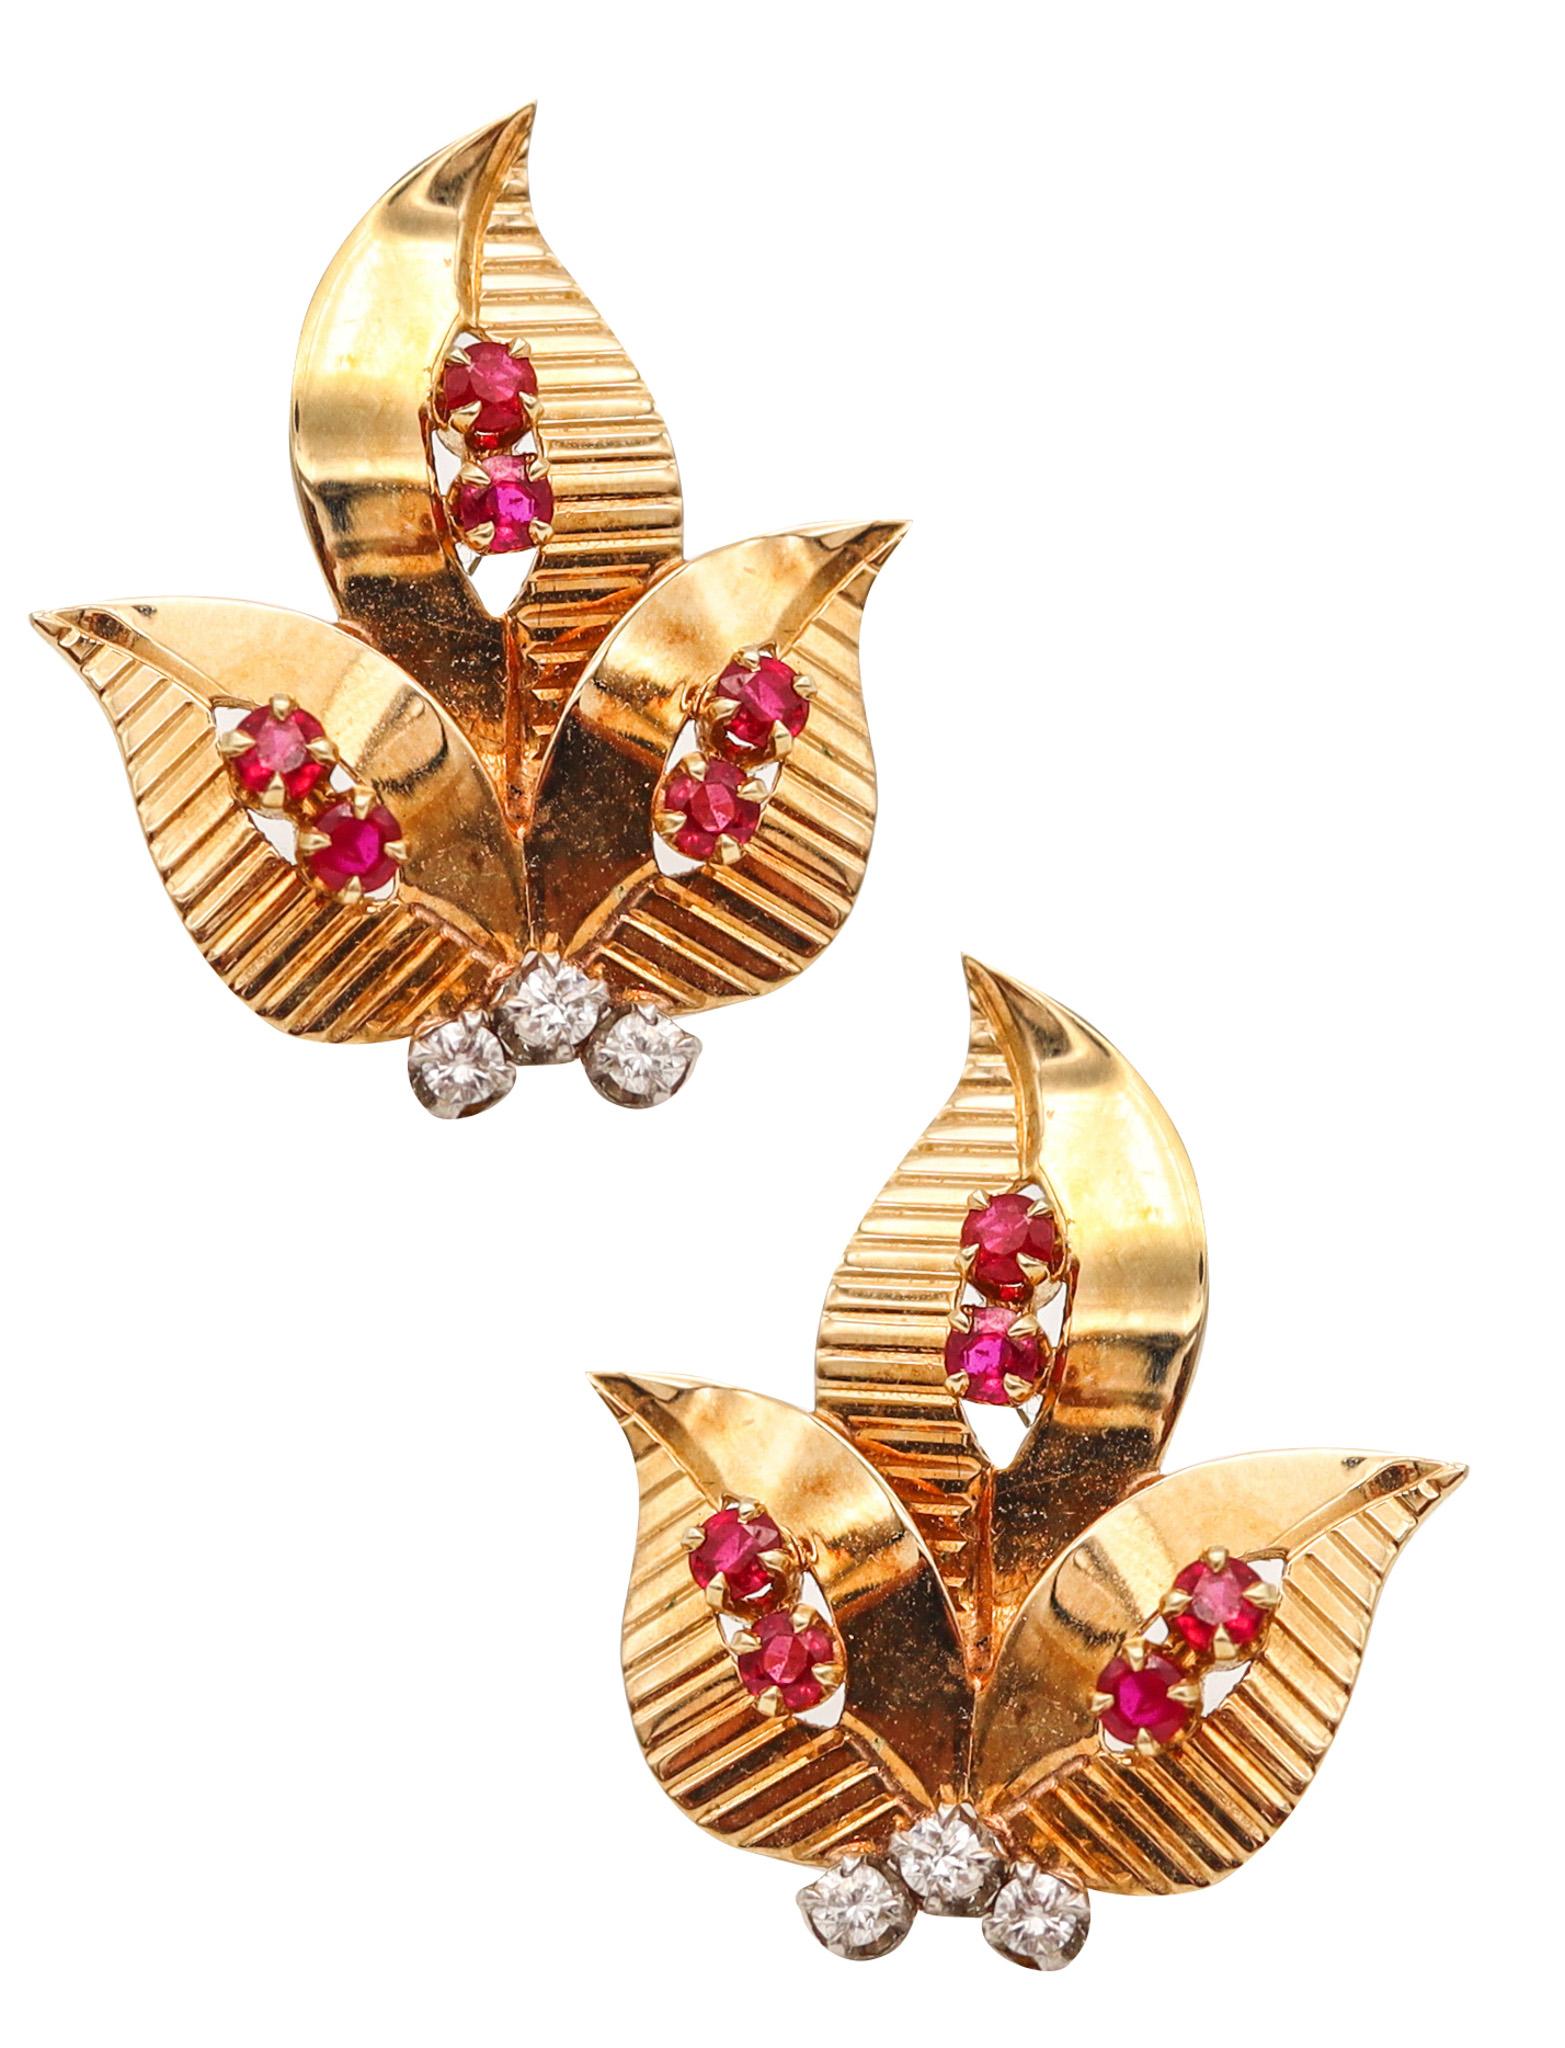 Mid-Century earrings designed by Tiffany & Co.

A beautiful pair of earrings, created in New York city at the Tiffany & Co. studios during the post war mid century period, back in the 1950. These pieces has been crafted in the shape of leaves in